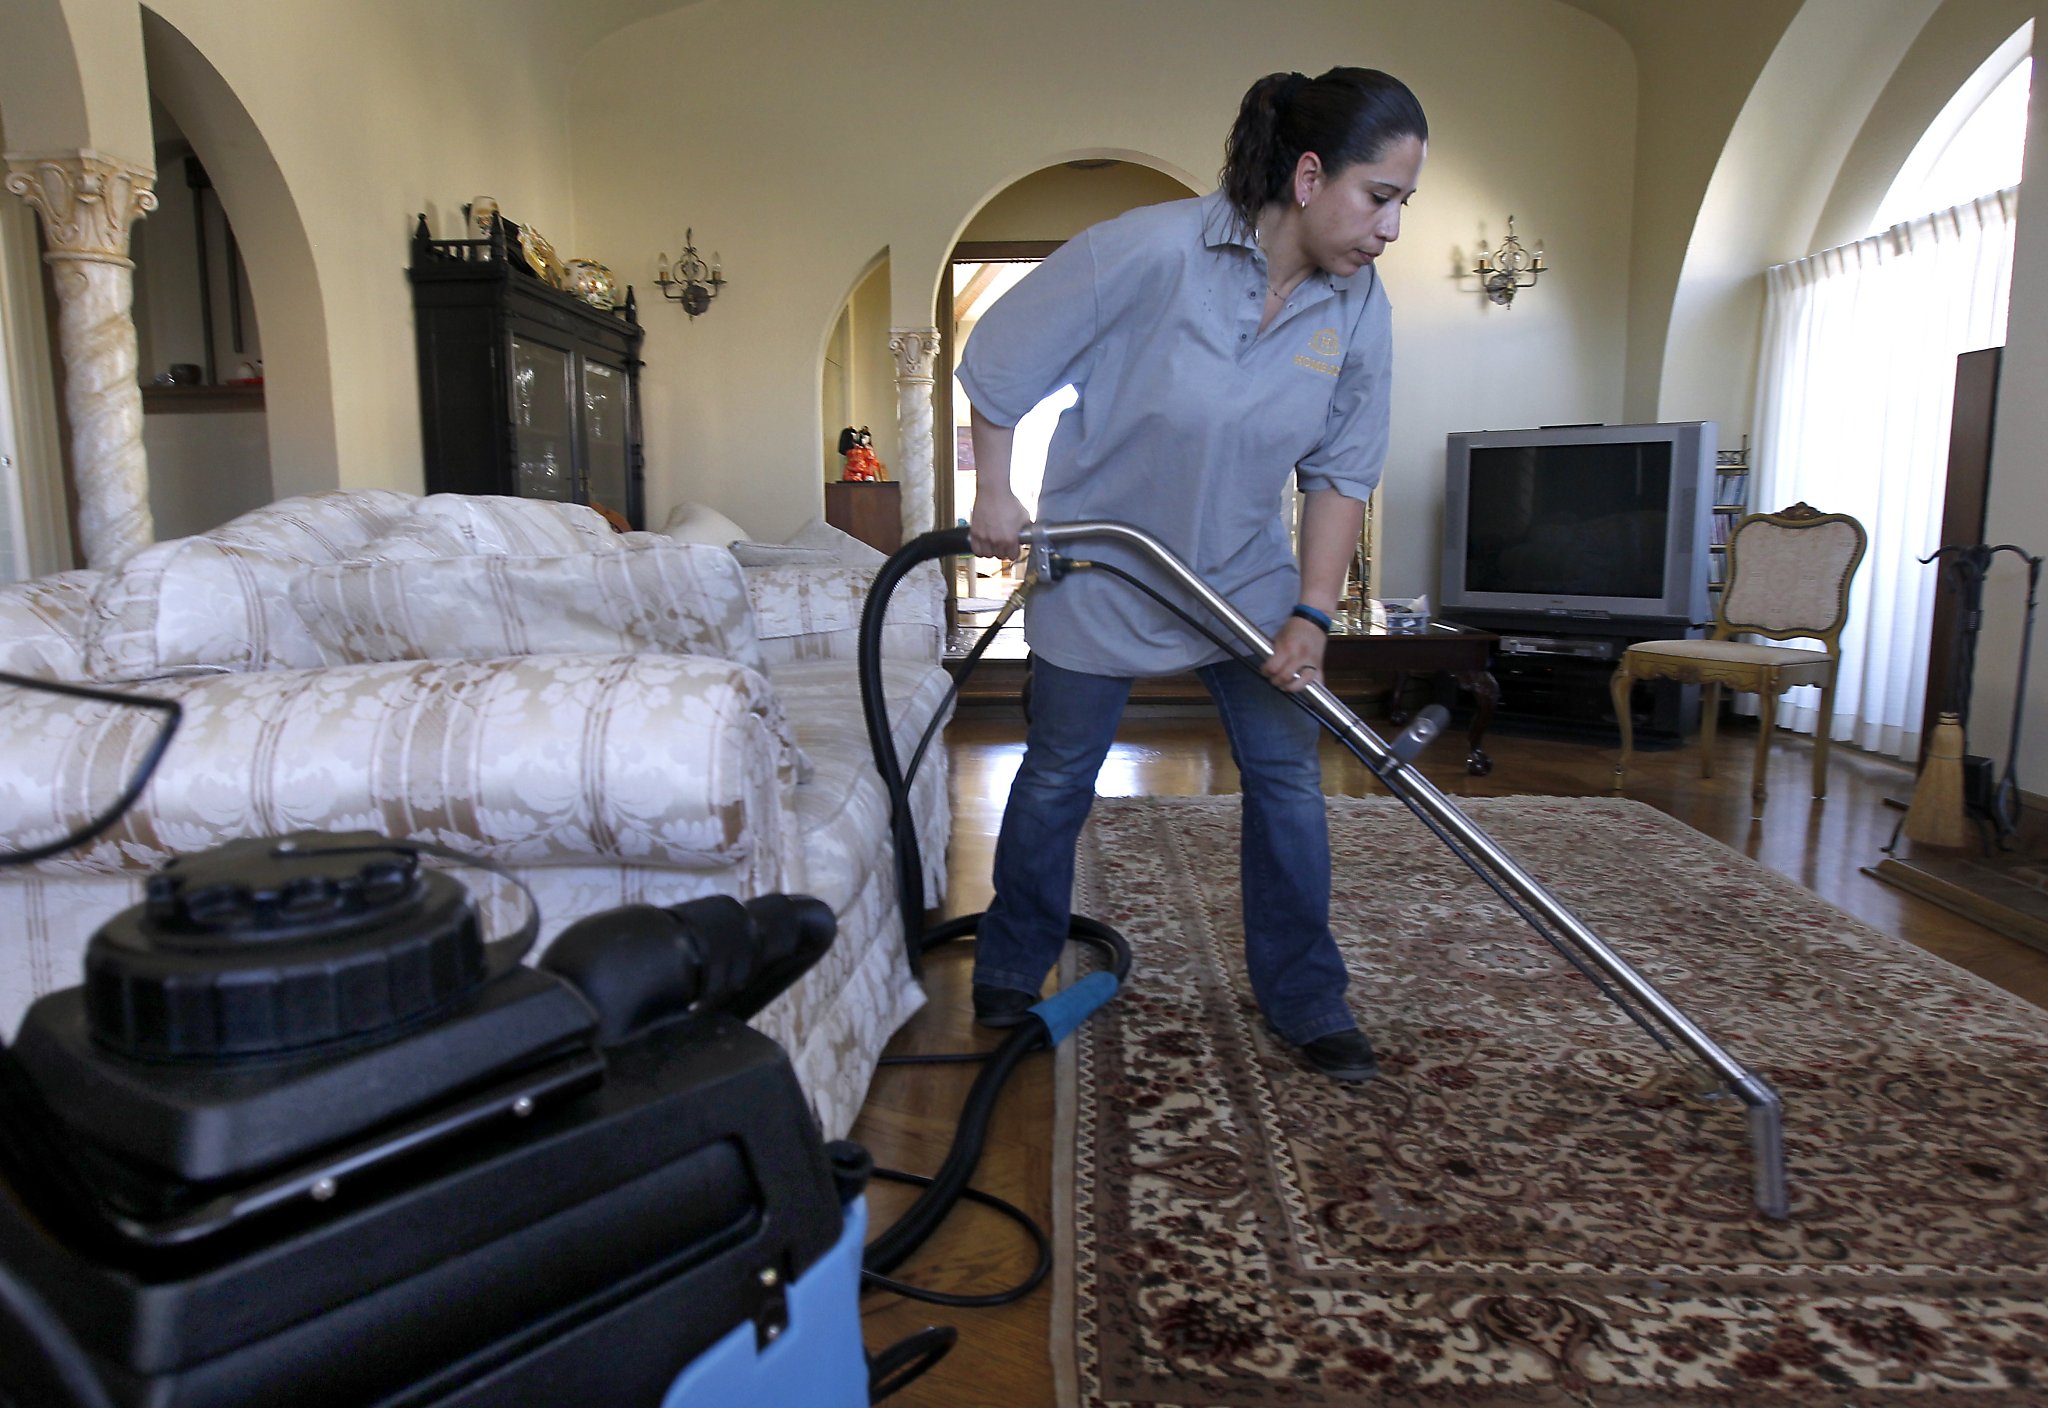 How do you get Homejoy house cleaning services?